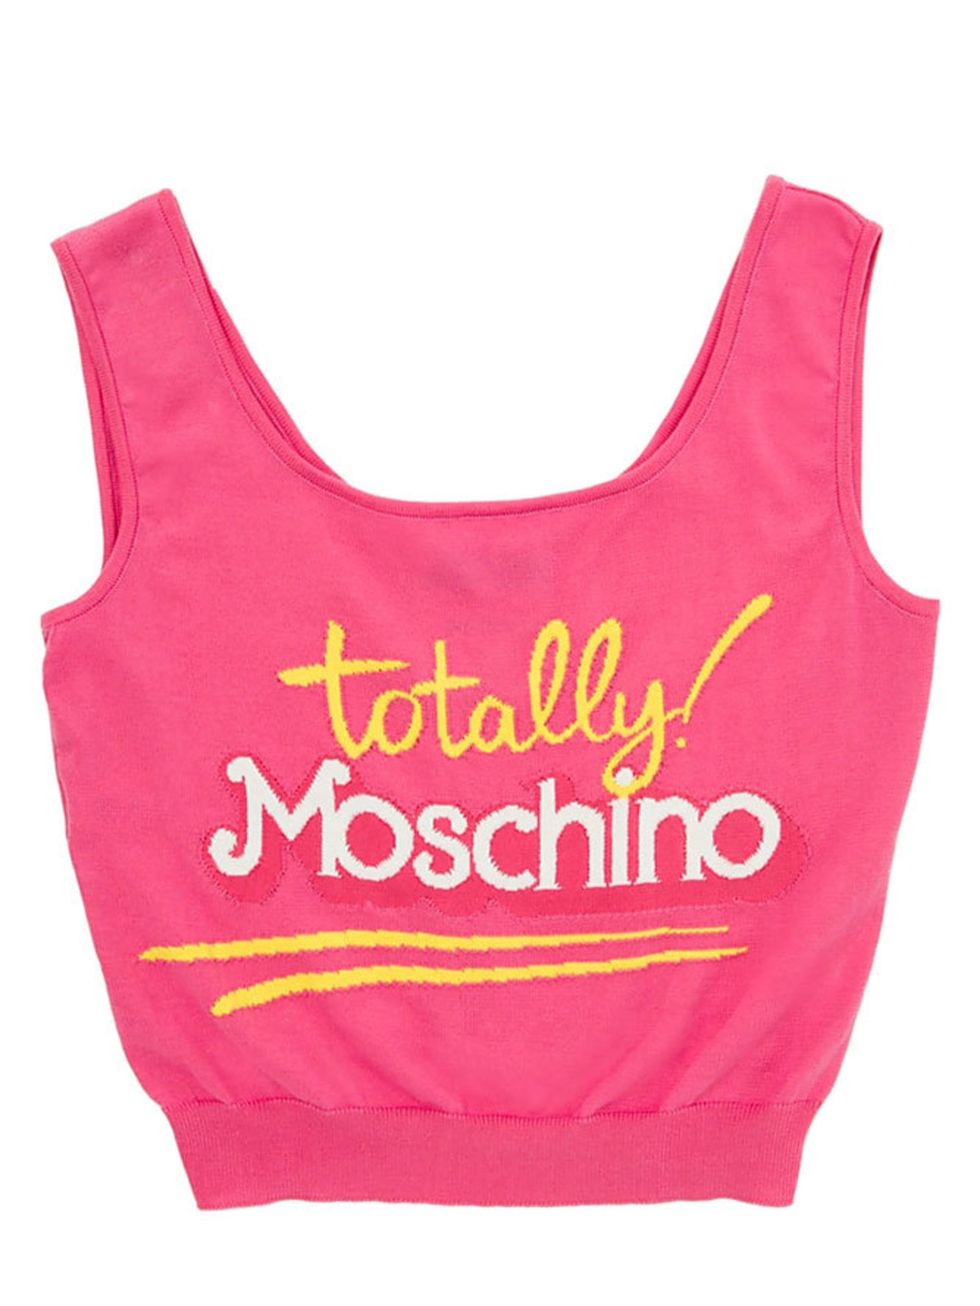 <p>Tank Top Moschino £185, <a href="http://www.stylebop.com/gb/product_details.php?id=586615">Style Bop</a> </p>